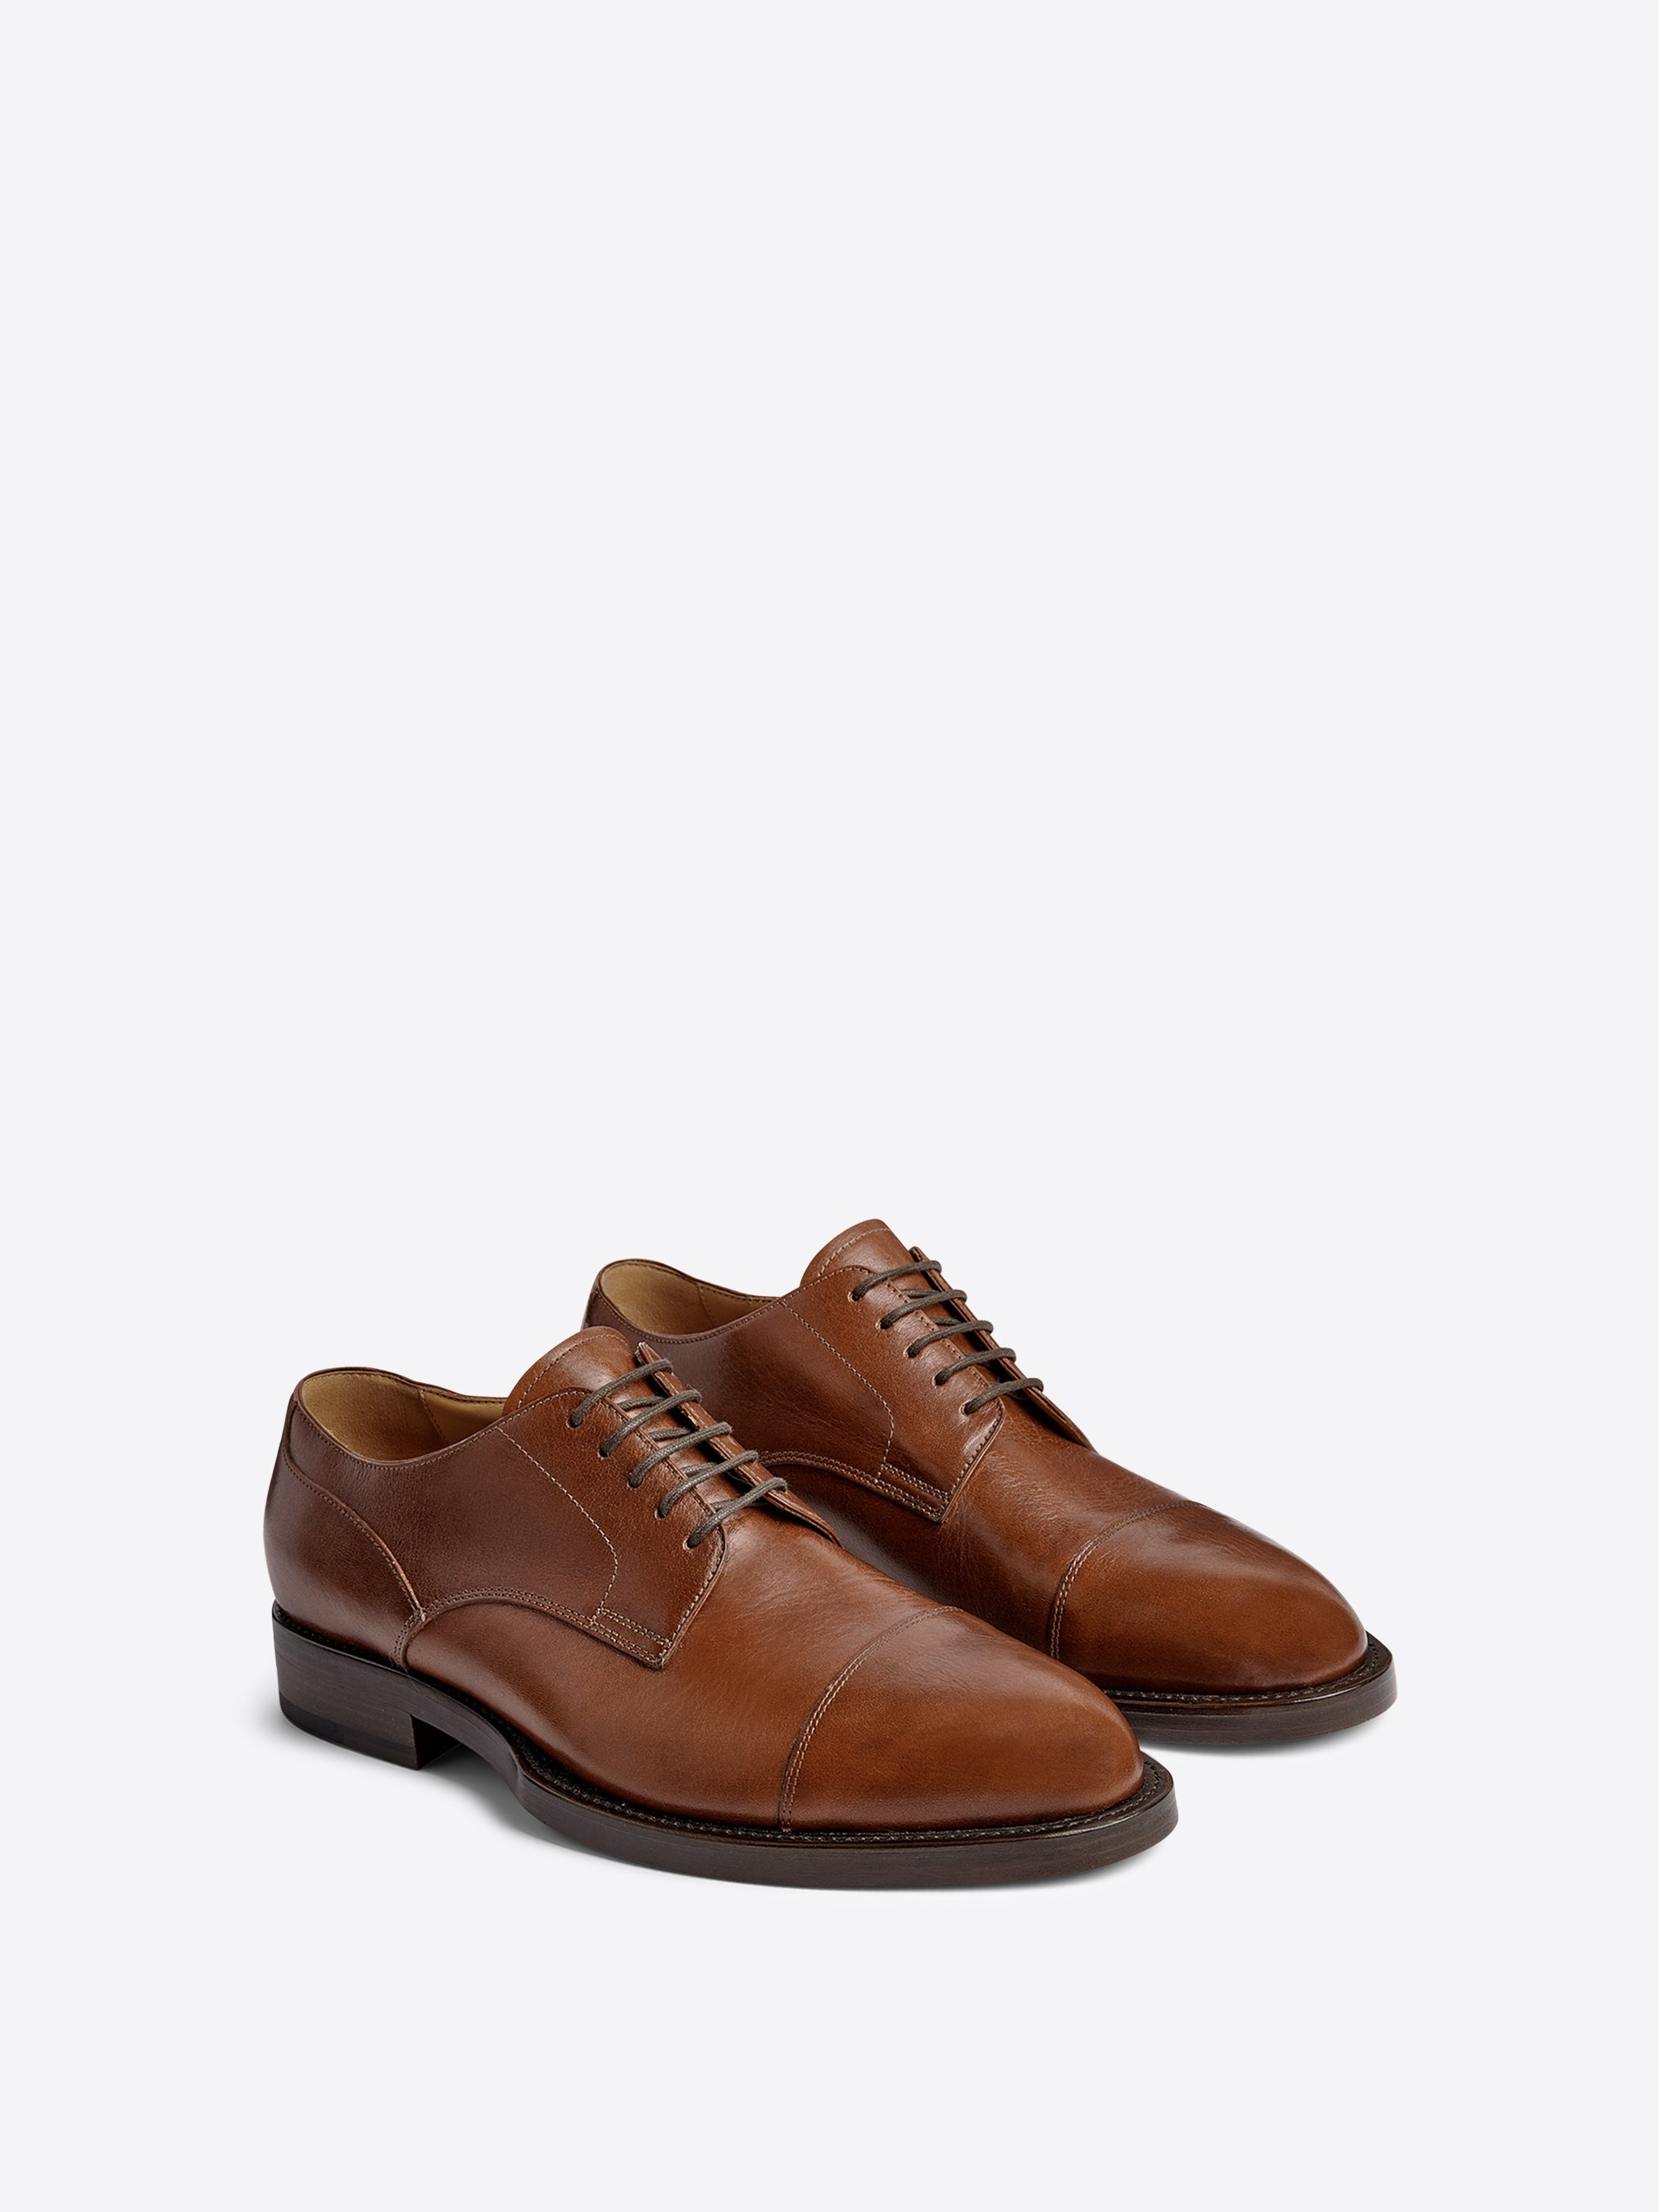 LEATHER DERBY SHOES - 3